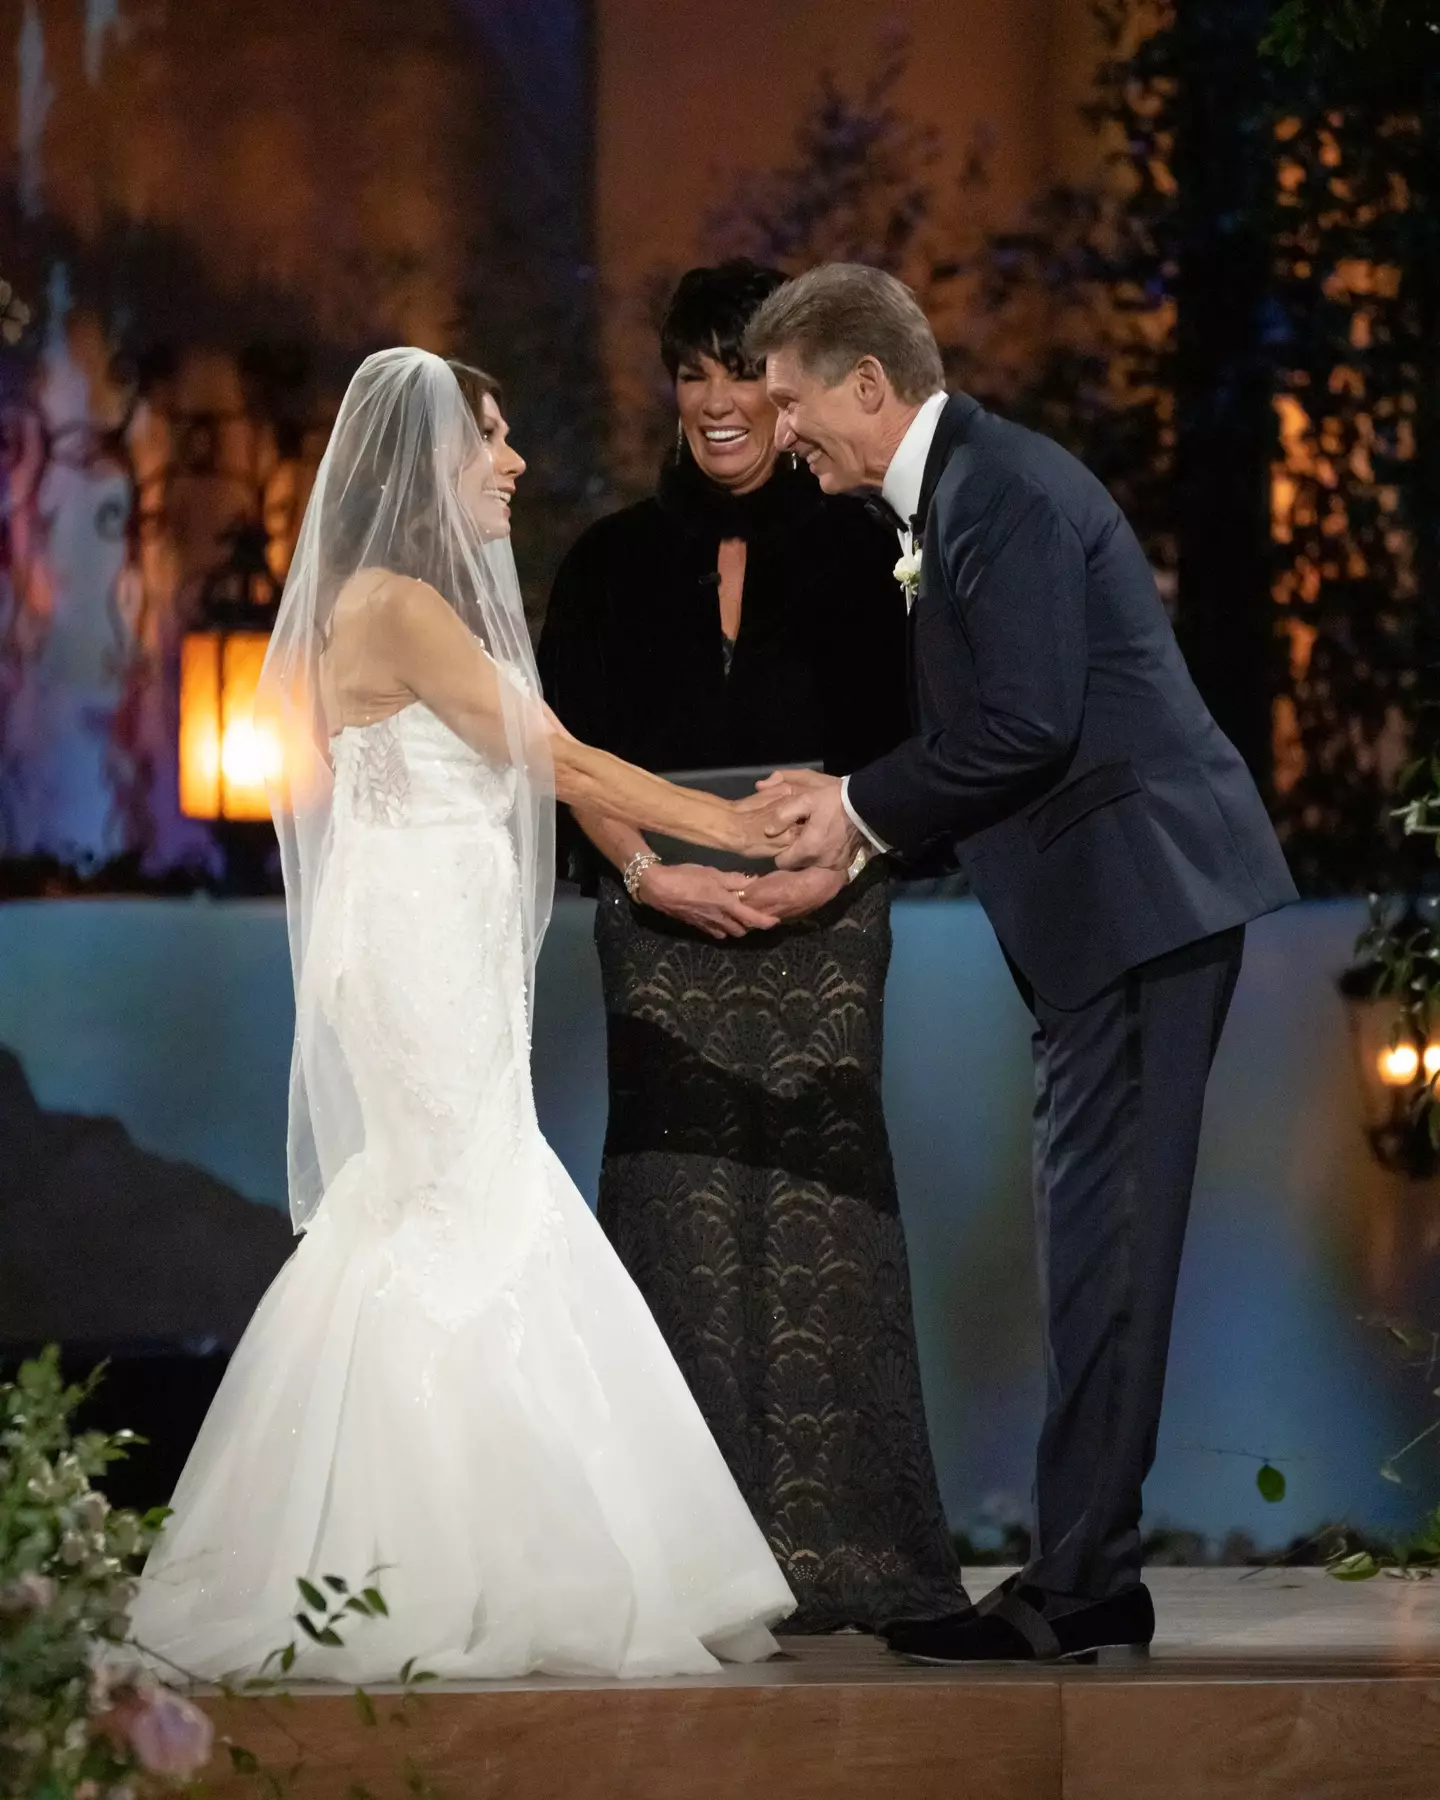 Their wedding was aired live on national TV. (Eric McCandless/Disney via Getty Images)